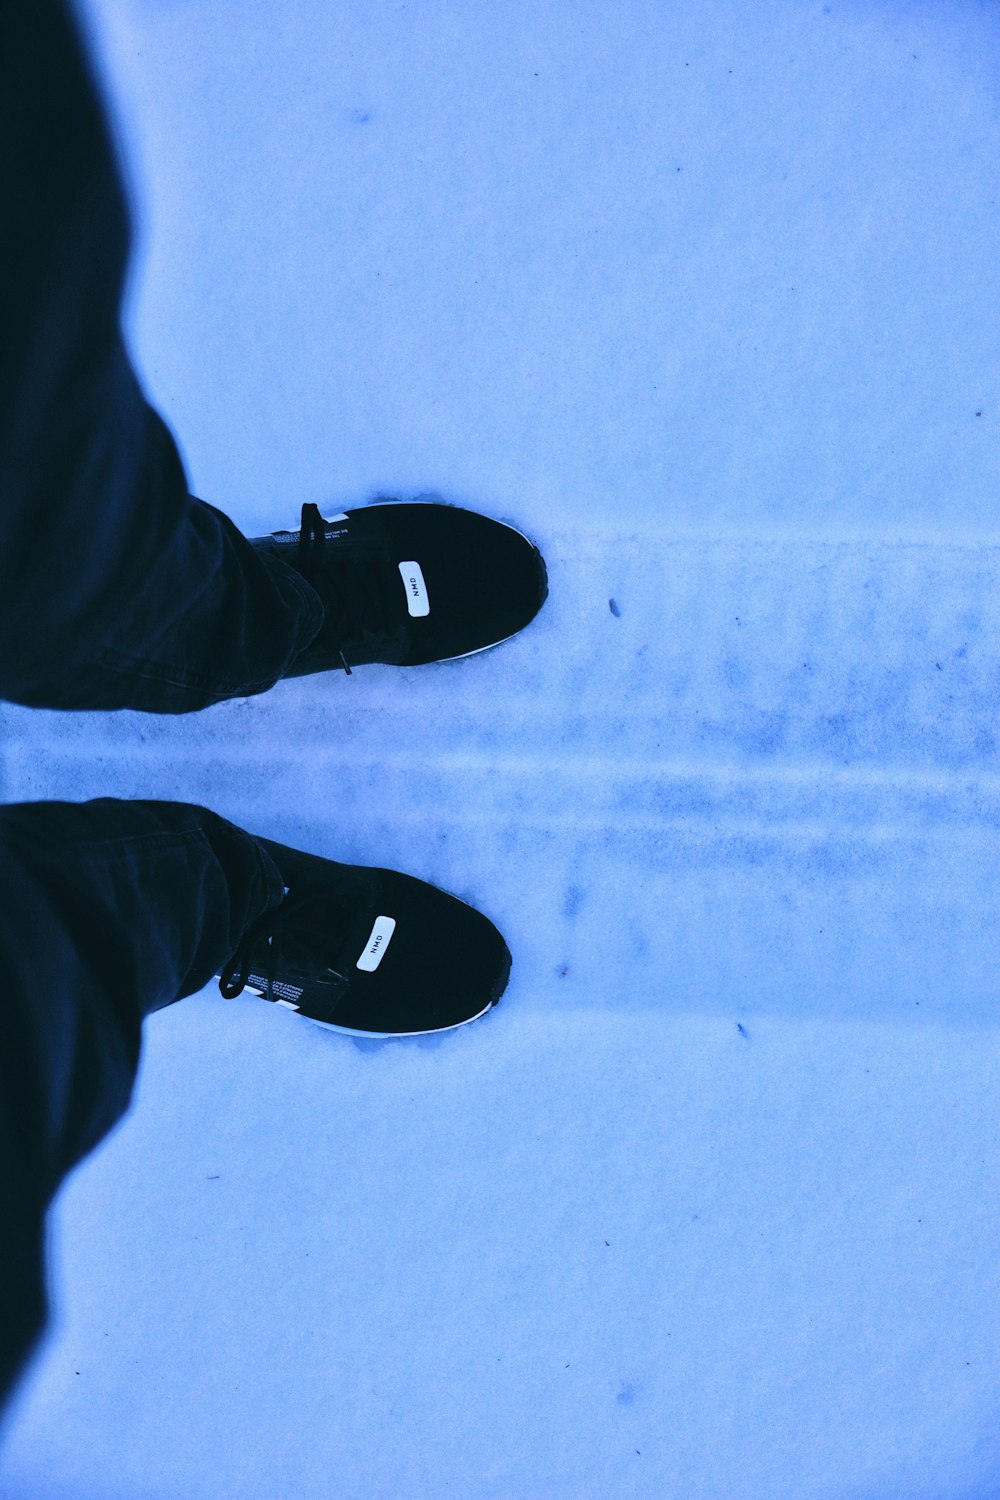 a person standing on a snow covered ground